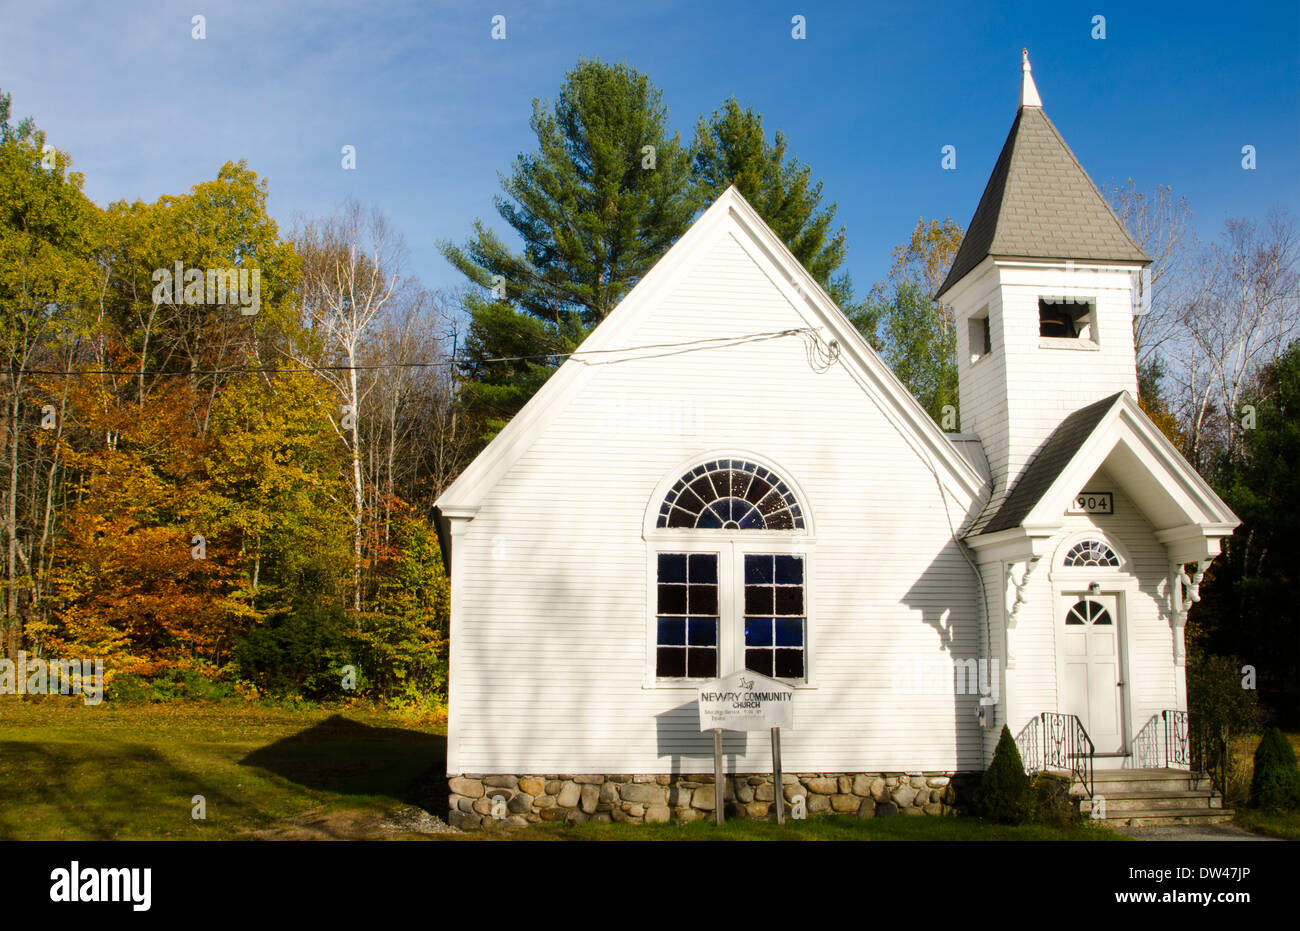 Newry Maine church Newry Community Church 1904 in Northern New England in fall foliage in October Stock Photo